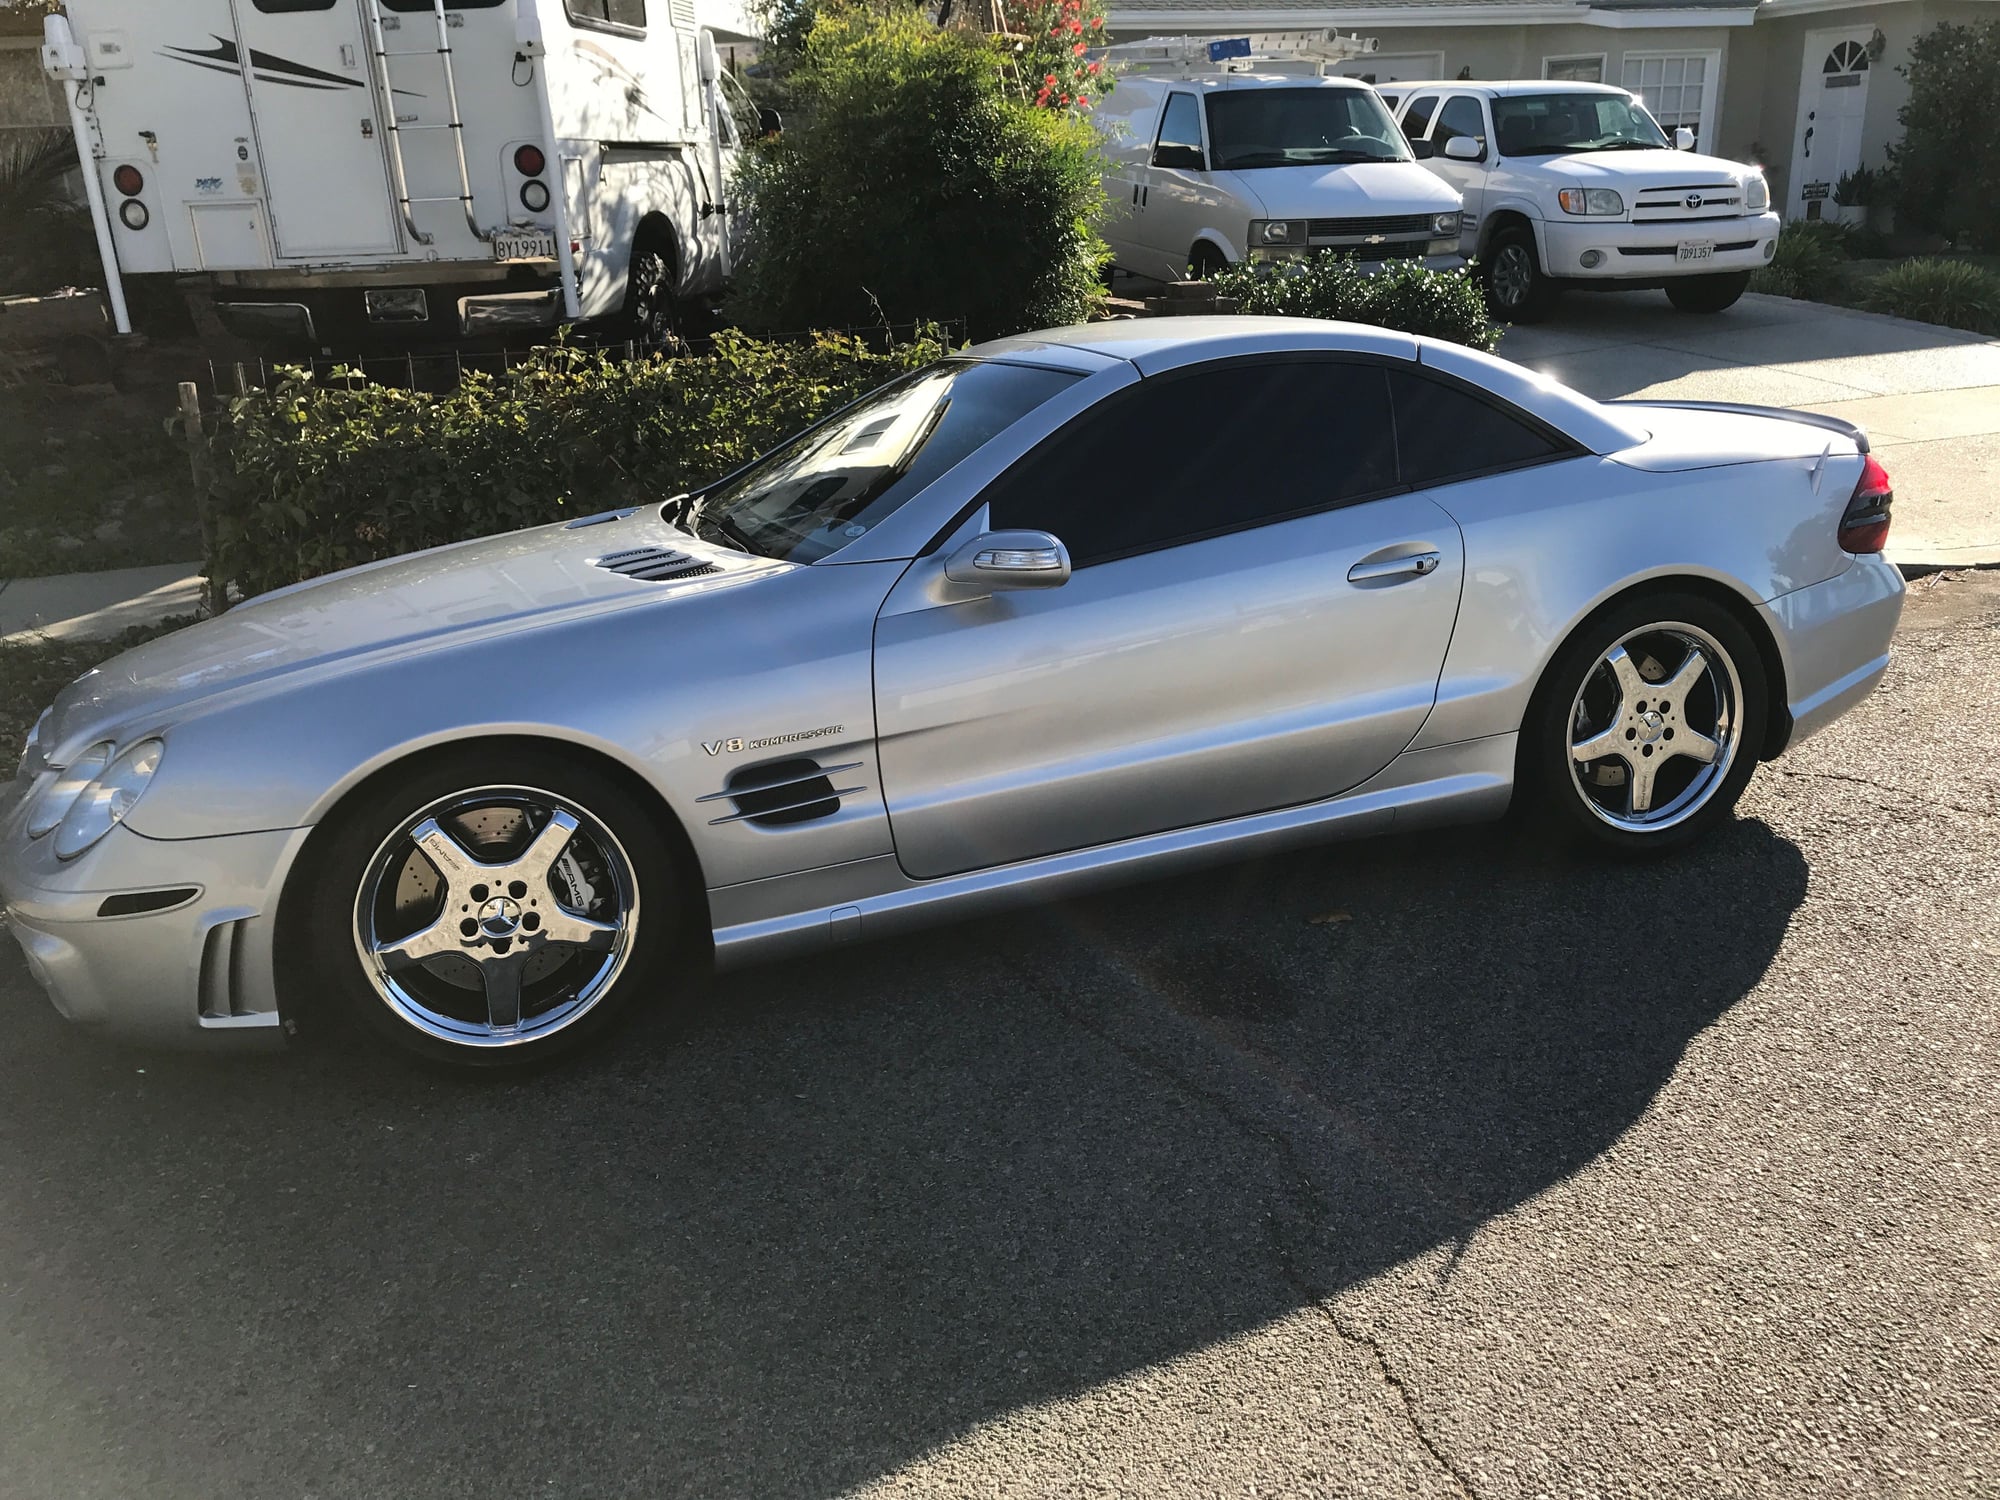 2004 Mercedes-Benz SL55 AMG - SL55 Amg low miles for sale - Used - VIN wdbsk74f94f065747 - 70,000 Miles - 8 cyl - 2WD - Automatic - Convertible - Silver - Sherman Oaks, CA 91402, United States